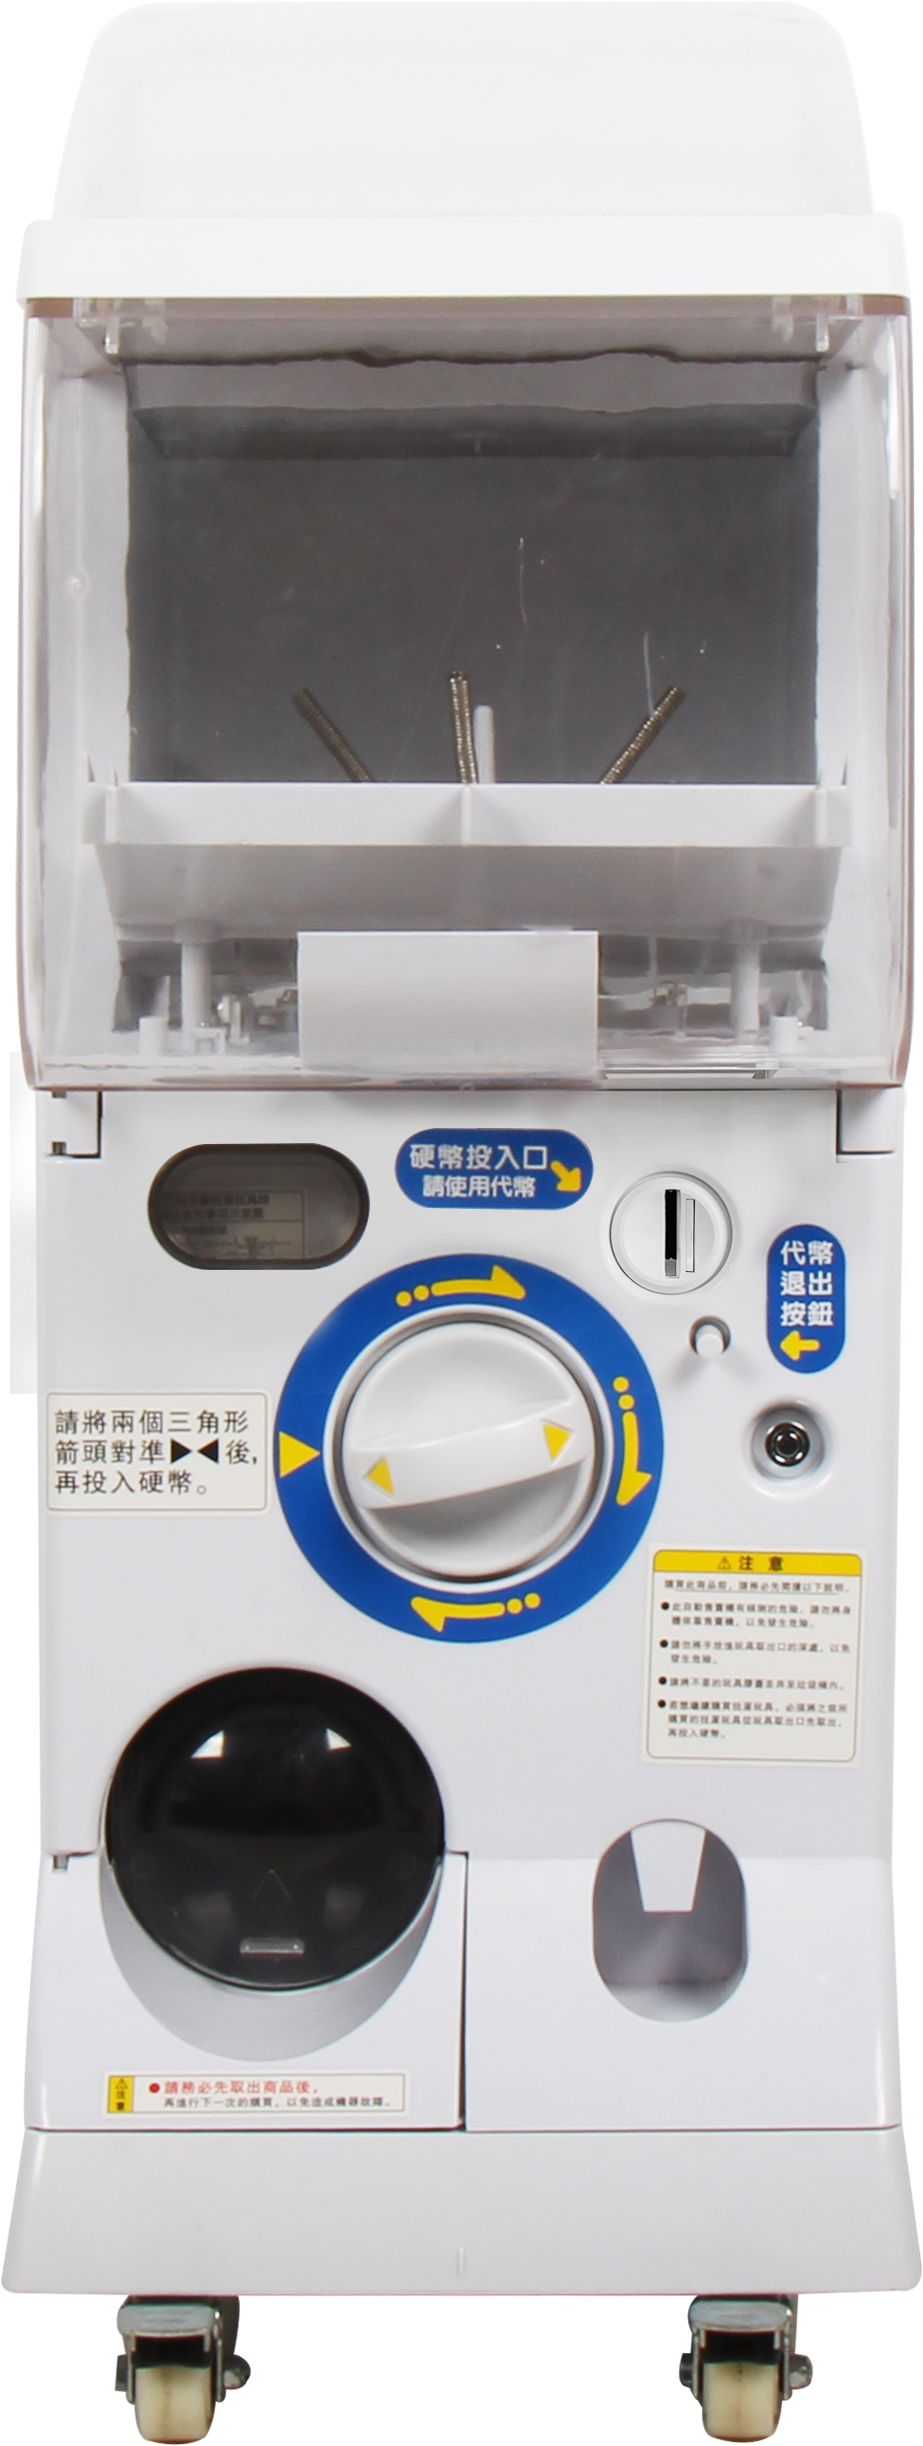 99911 CAPSULE GASHAPON VENDING MACHINE-1 - AVAILABLE - CONTACT BC@BCMINI.COM TO ORDER